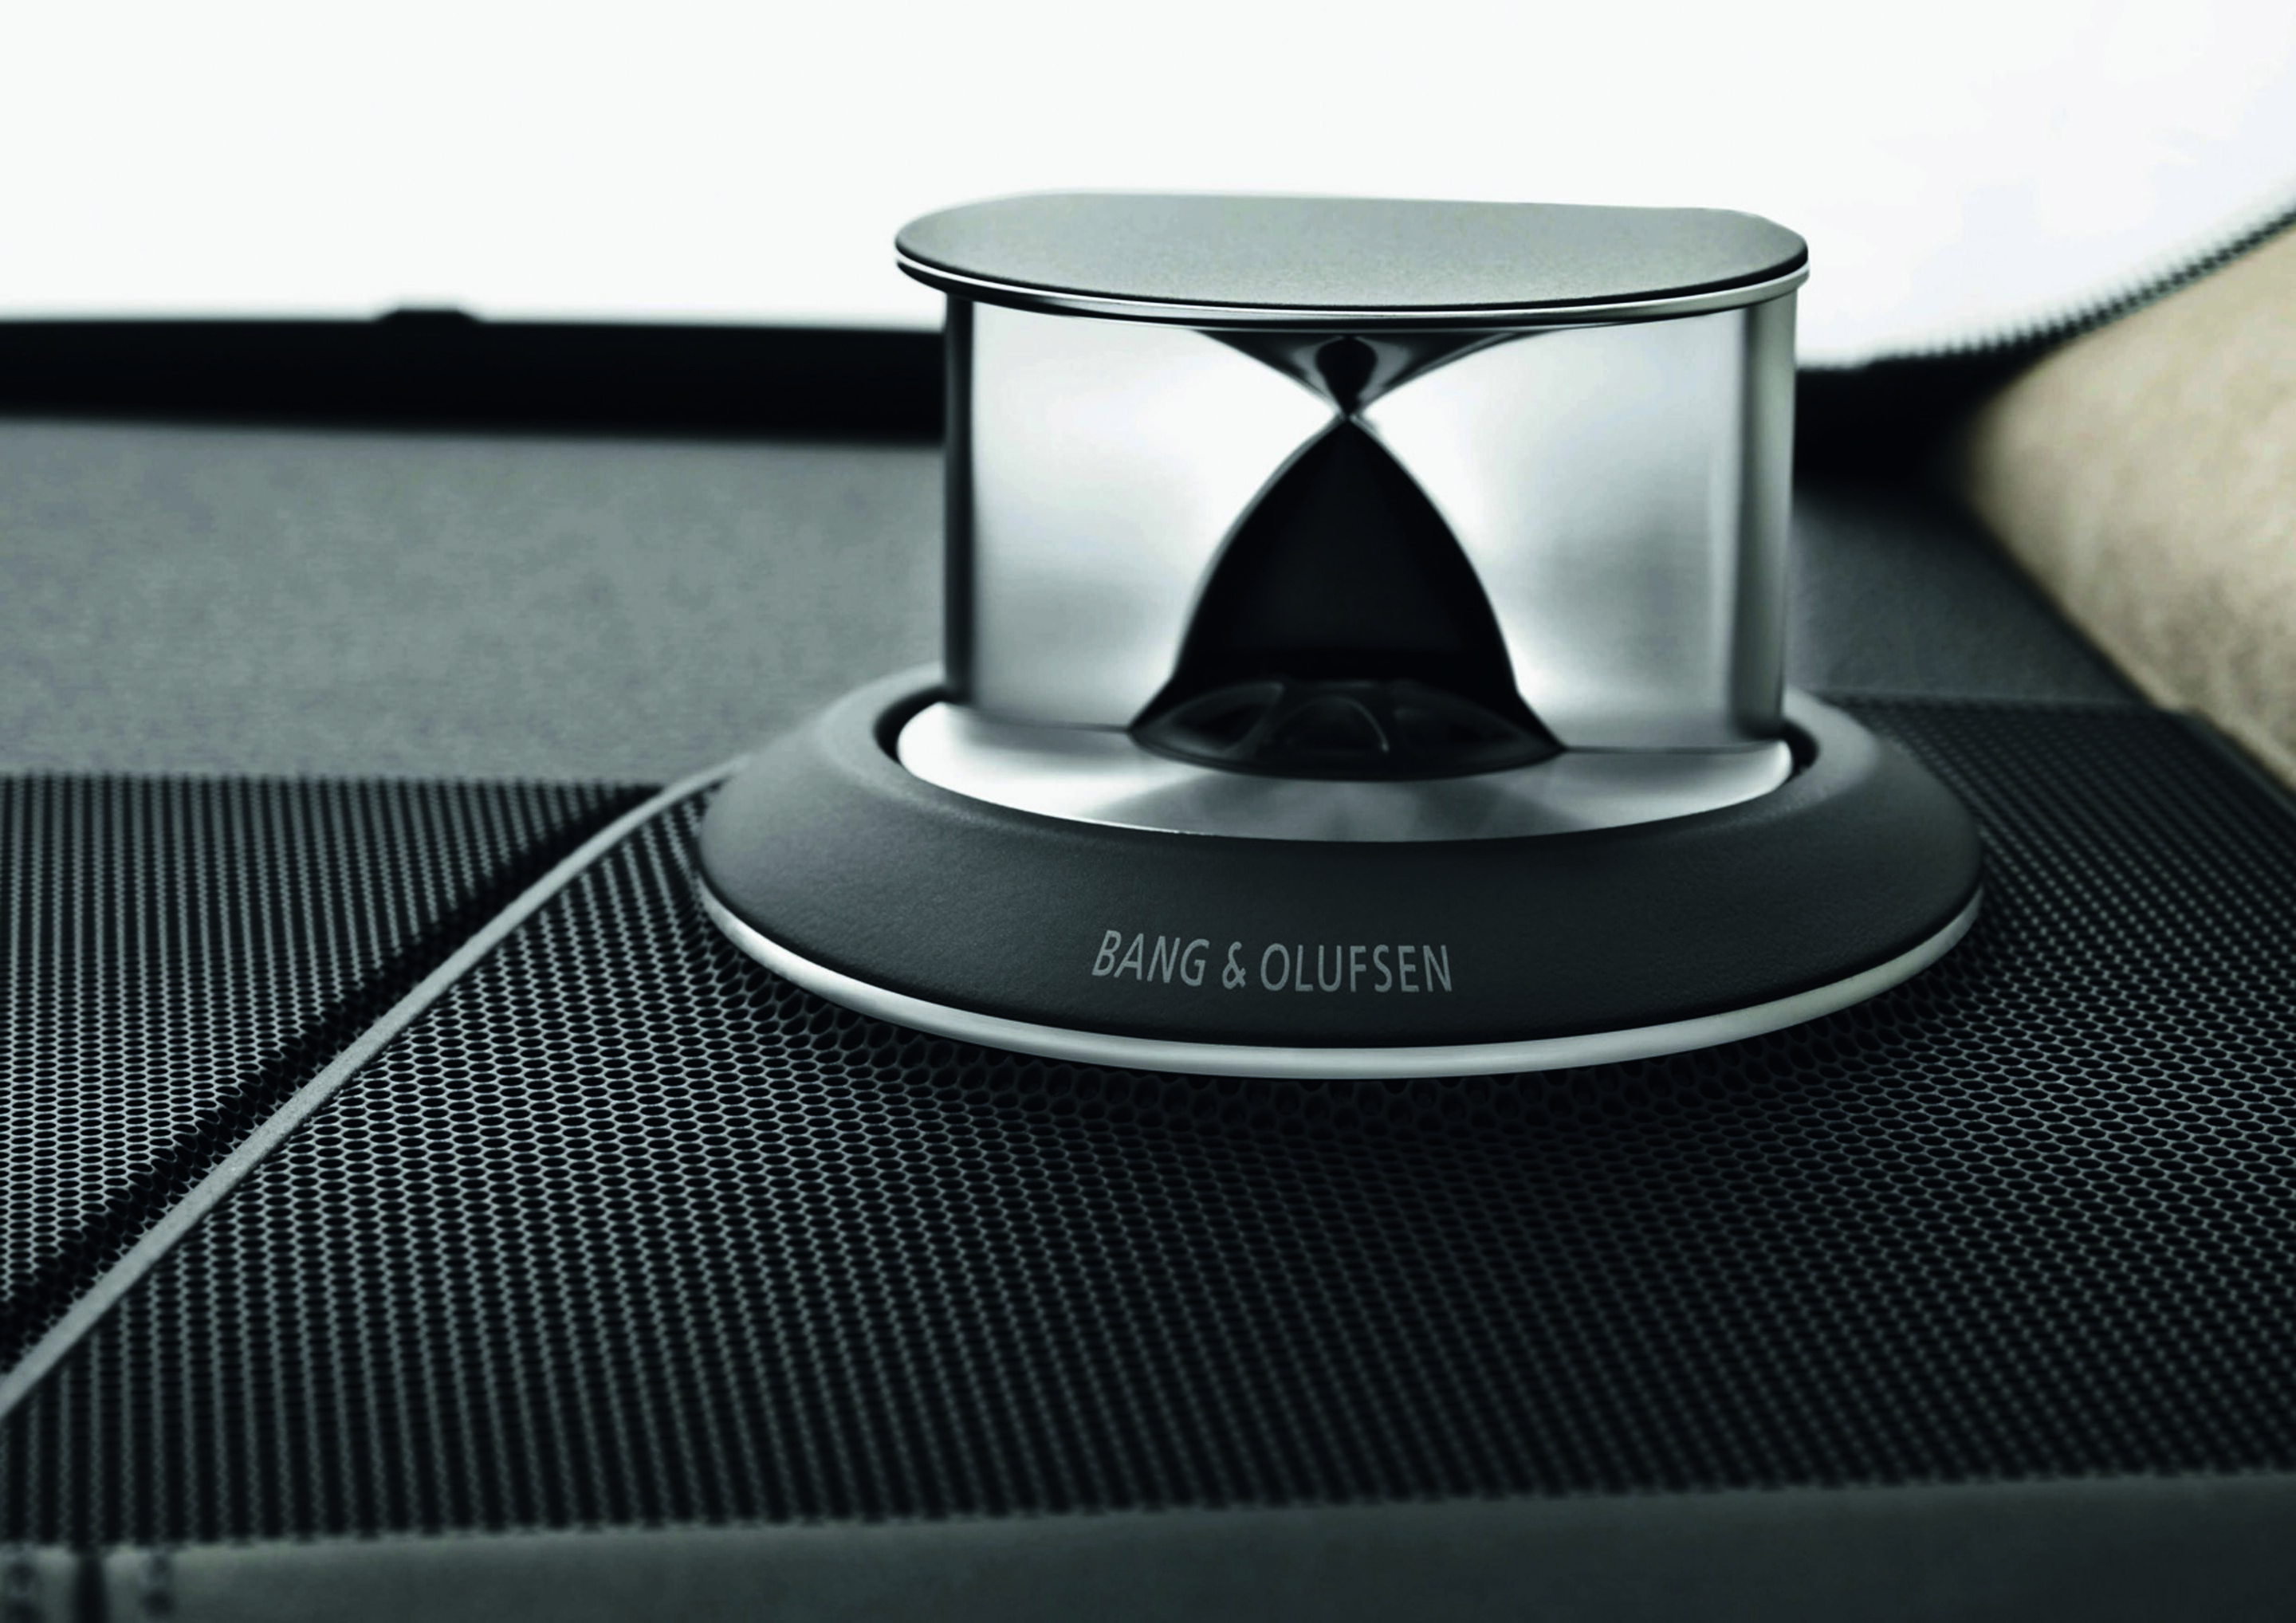 Bang & Olufsen Sound System with 3D sound